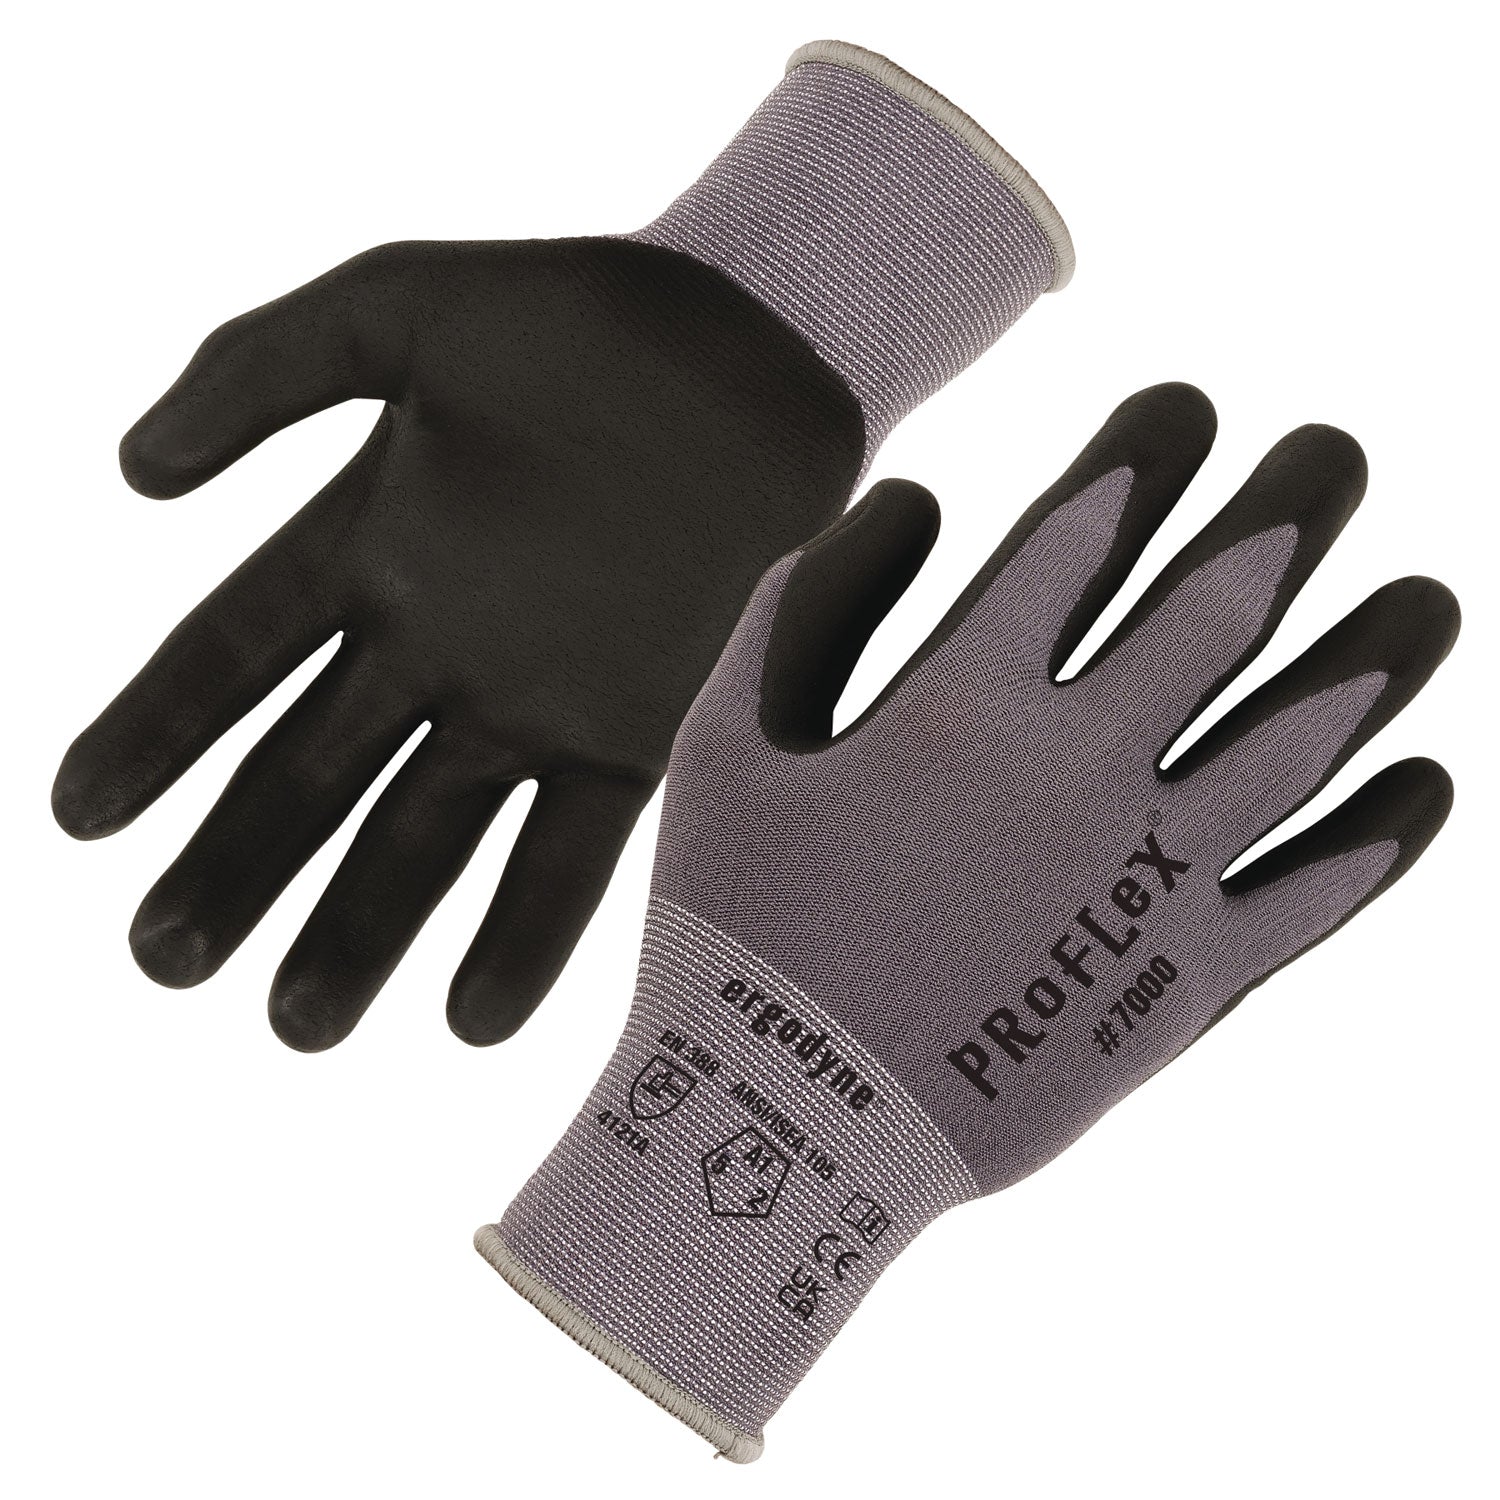 proflex-7000-nitrile-coated-gloves-microfoam-palm-gray-x-small-pair-ships-in-1-3-business-days_ego10371 - 1